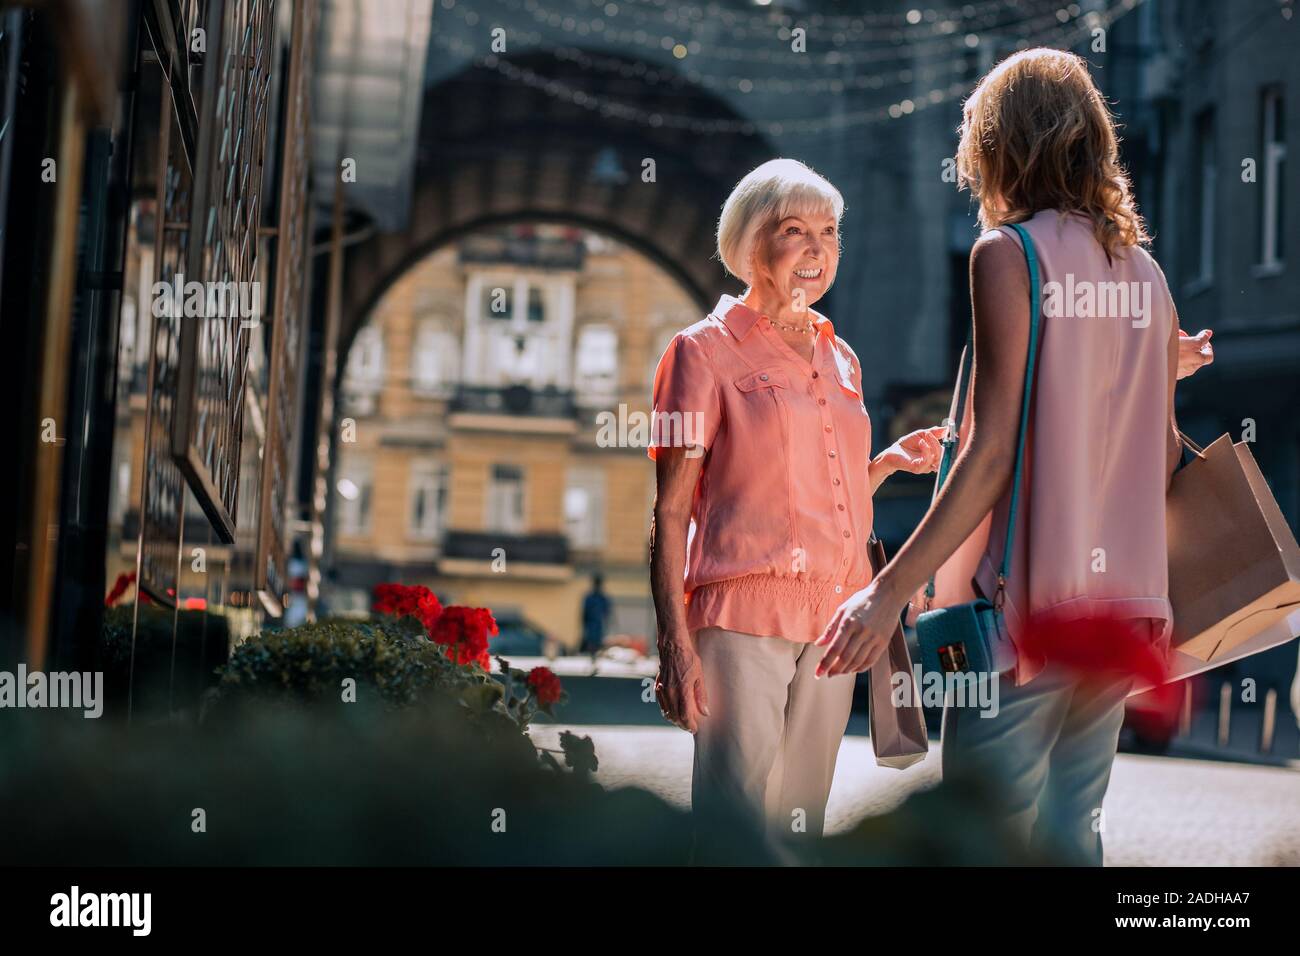 Cheerful woman talking to daughter and smiling stock photo Stock Photo